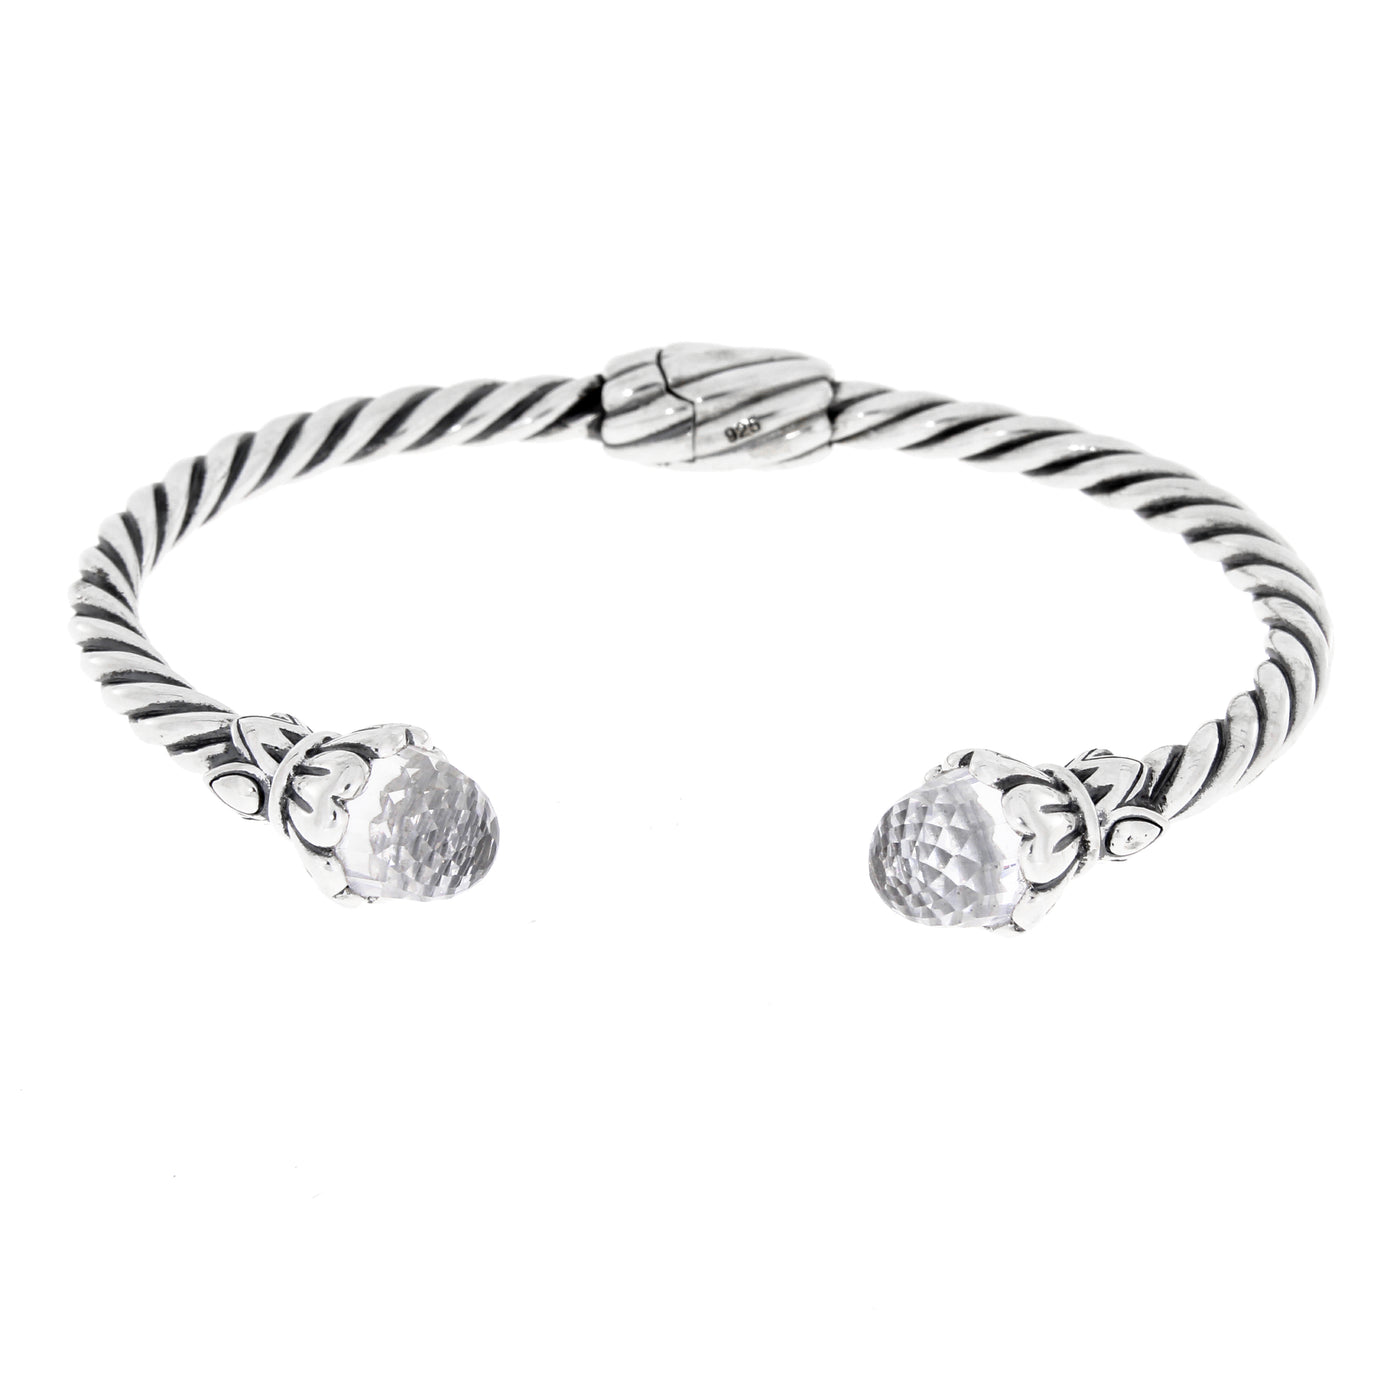 Twisted Spiral Cable 925 Sterling Silver Vintage Cuff Bracelet With Cubic Zirconium Gemstones